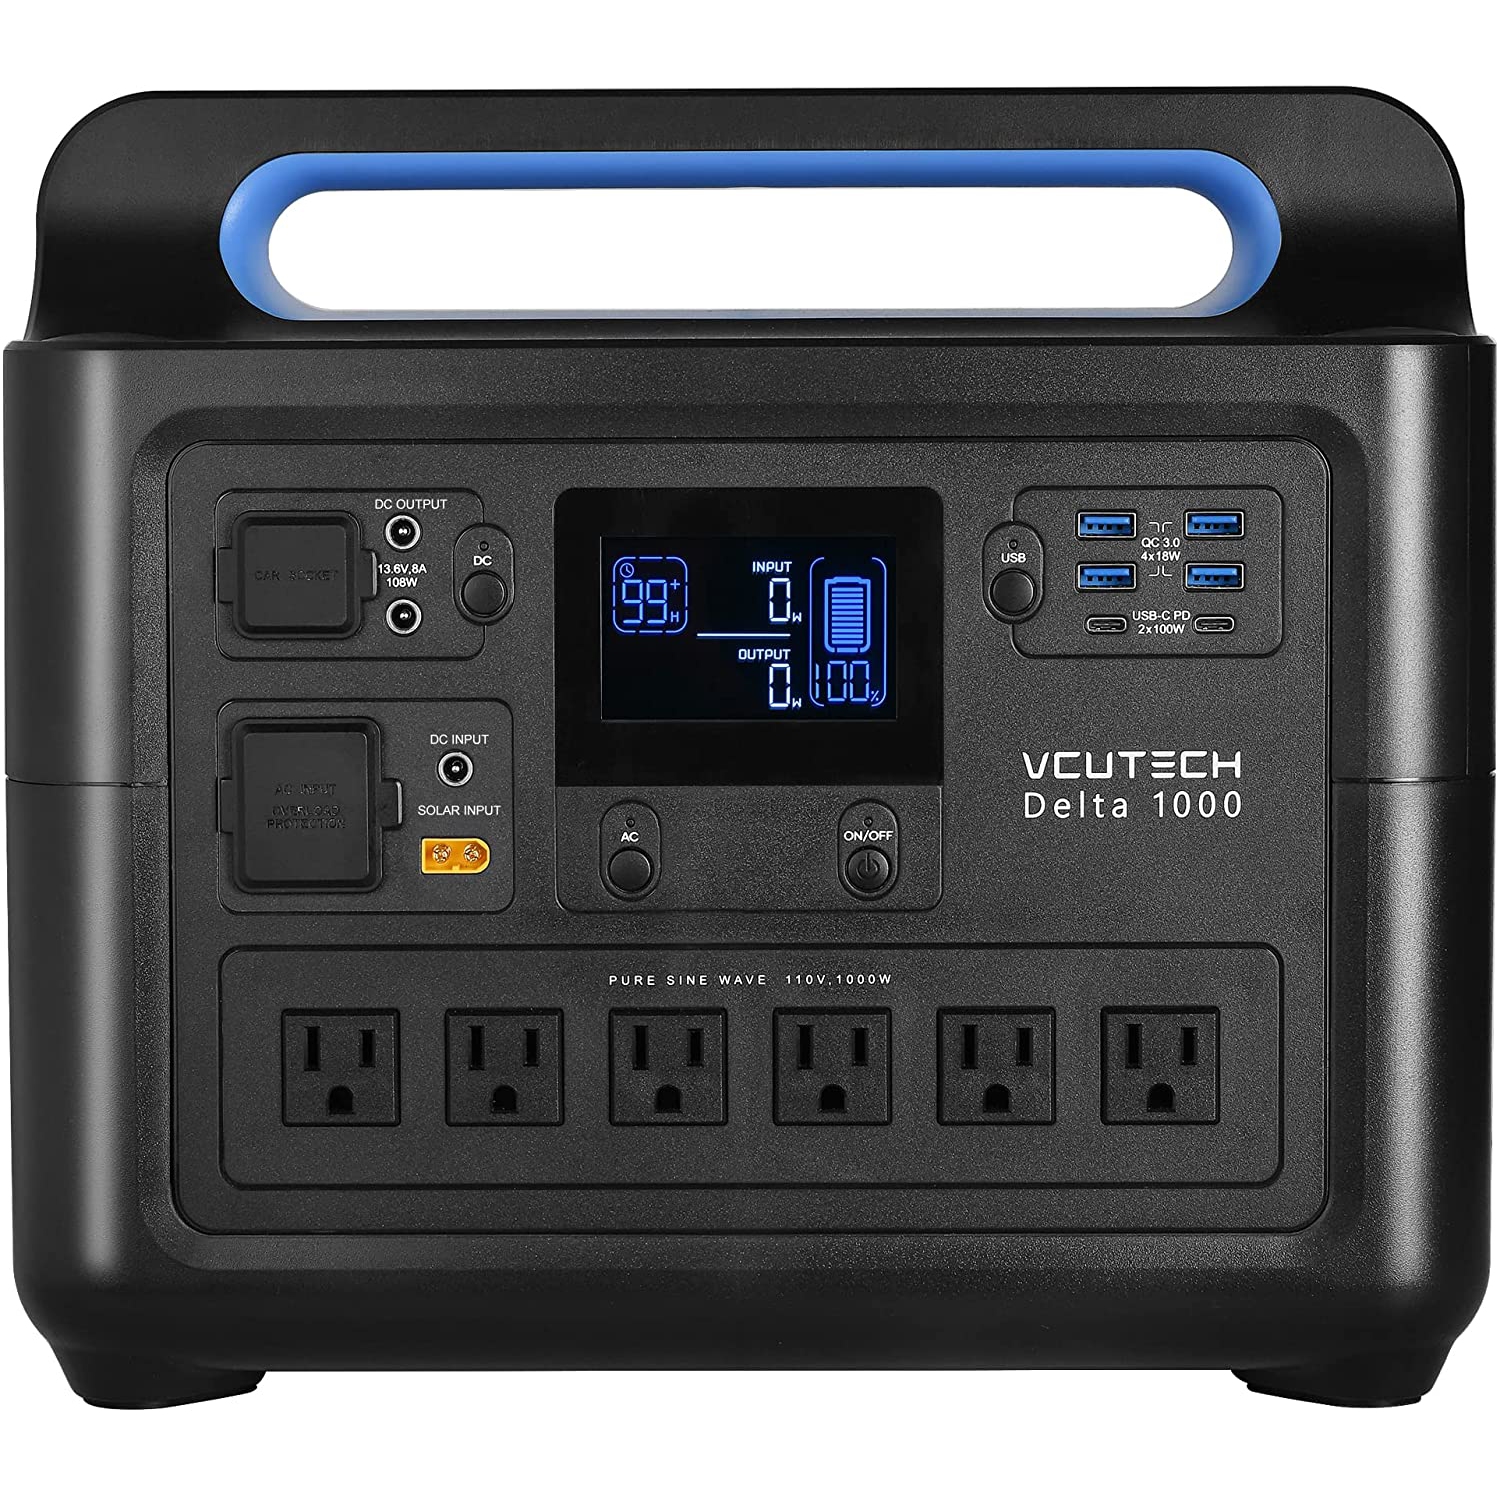 VCUTECH Portable Power Station 1000W, 1228WH Capacity LiFePO4 Battery, Support Up to 15 Device, Solar Generator Charge 0-90% In 2hrs, Backup Battery Power Supply